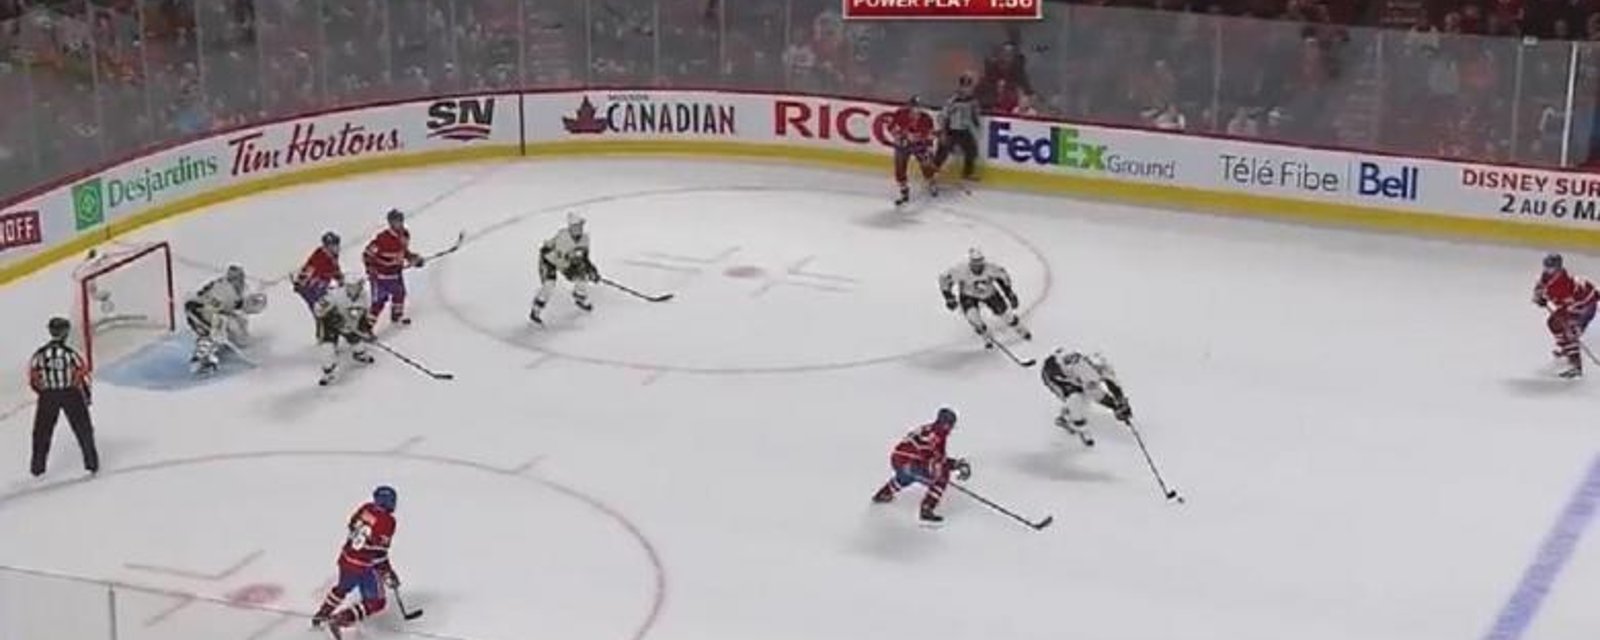 Great defensive awareness finishes off the Canadiens!